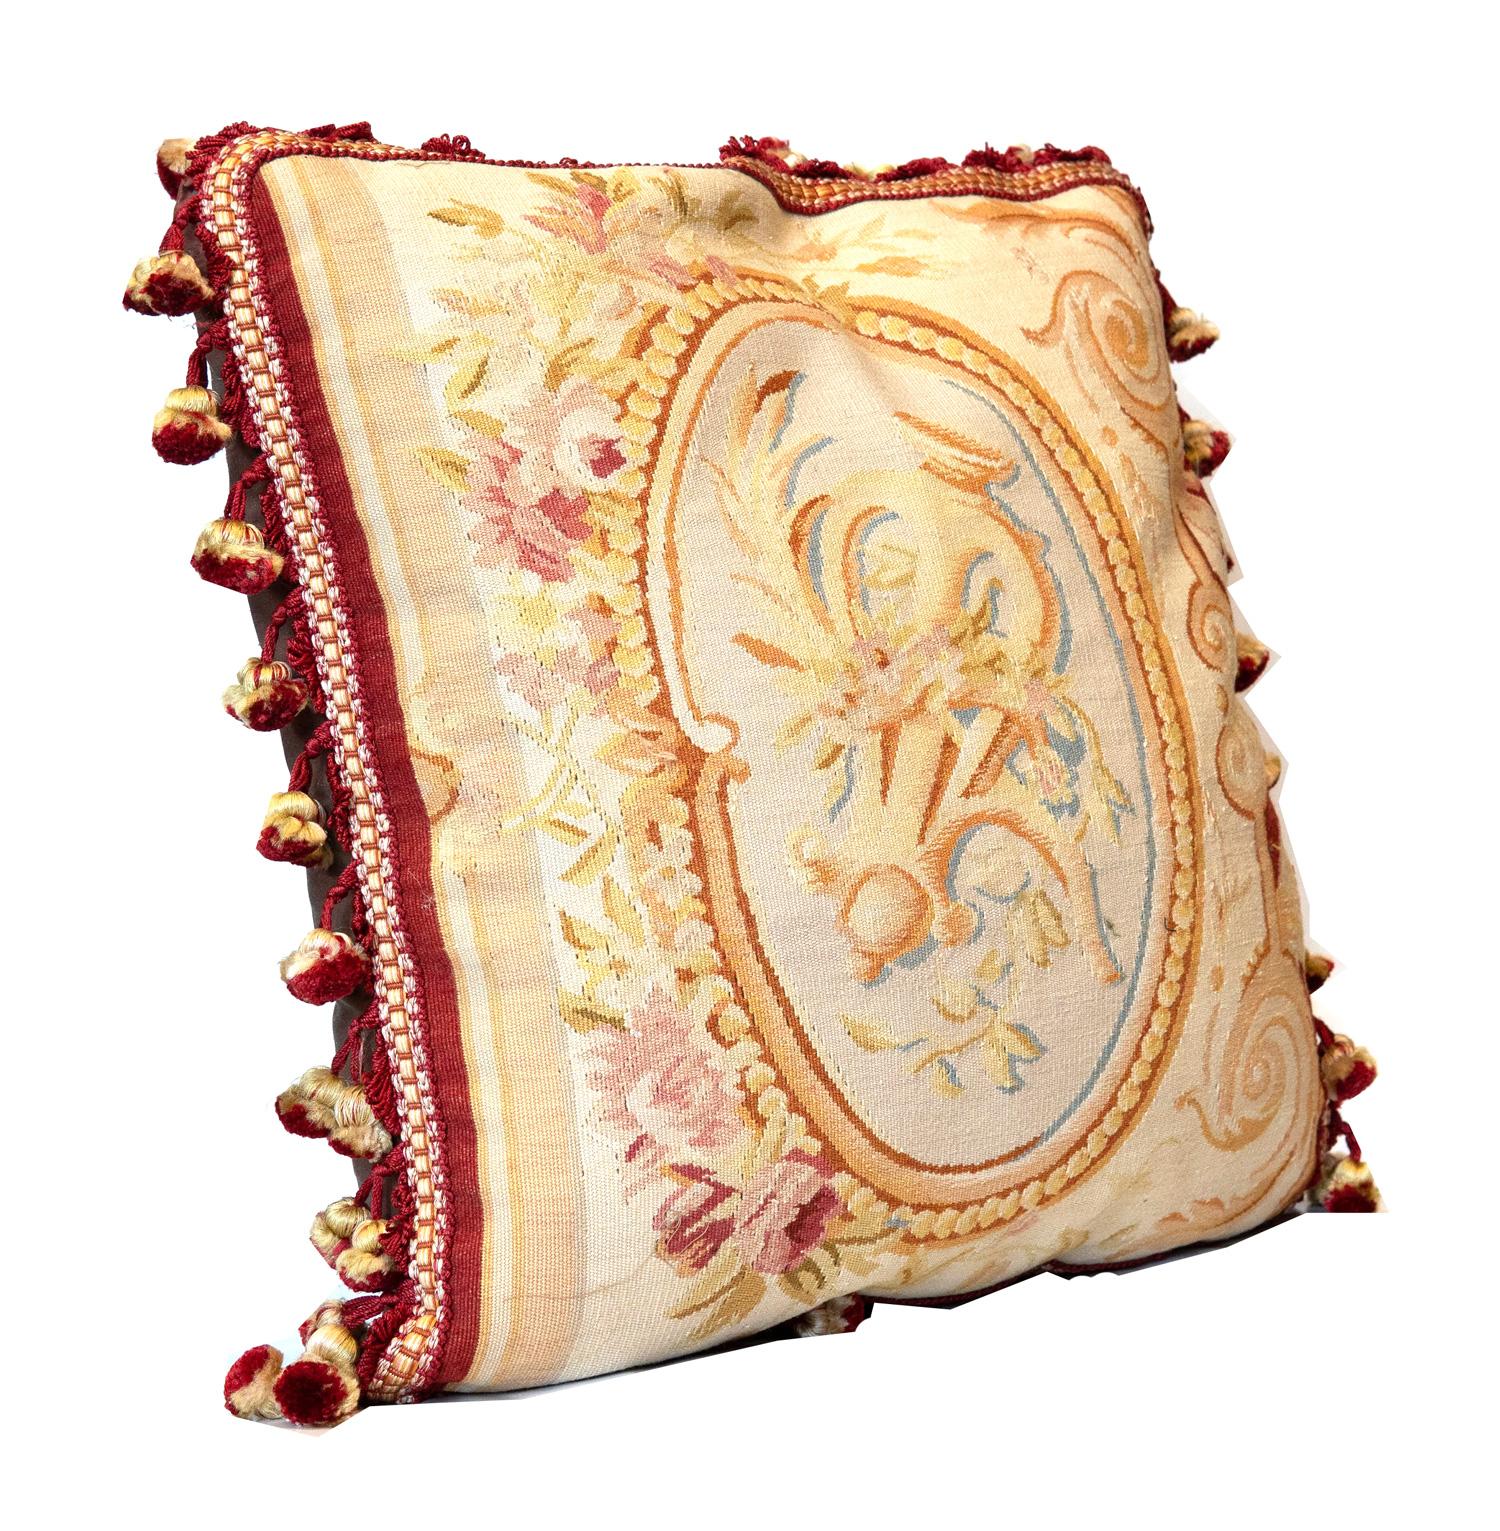 Antique rug vintage pillowcase zipper cushion handmade Aubusson pillow cover, view one of the most comprehensive collections of the decorative pillow, handmade throw pillow cover of traditional French Aubusson rugs, wool, and silk cushions cover